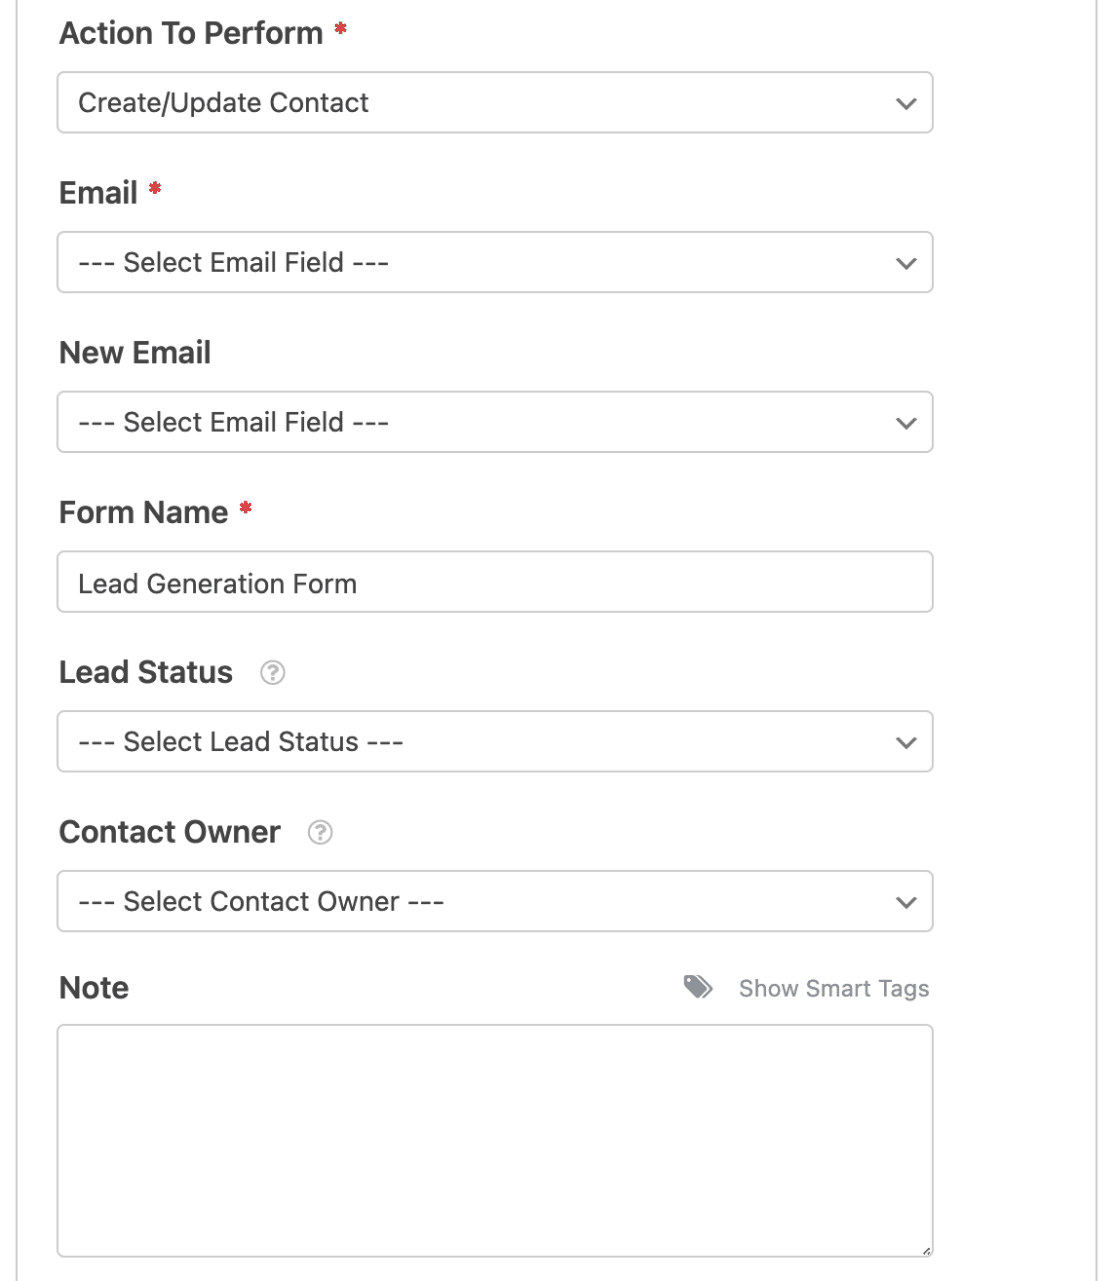 Create or update contact options